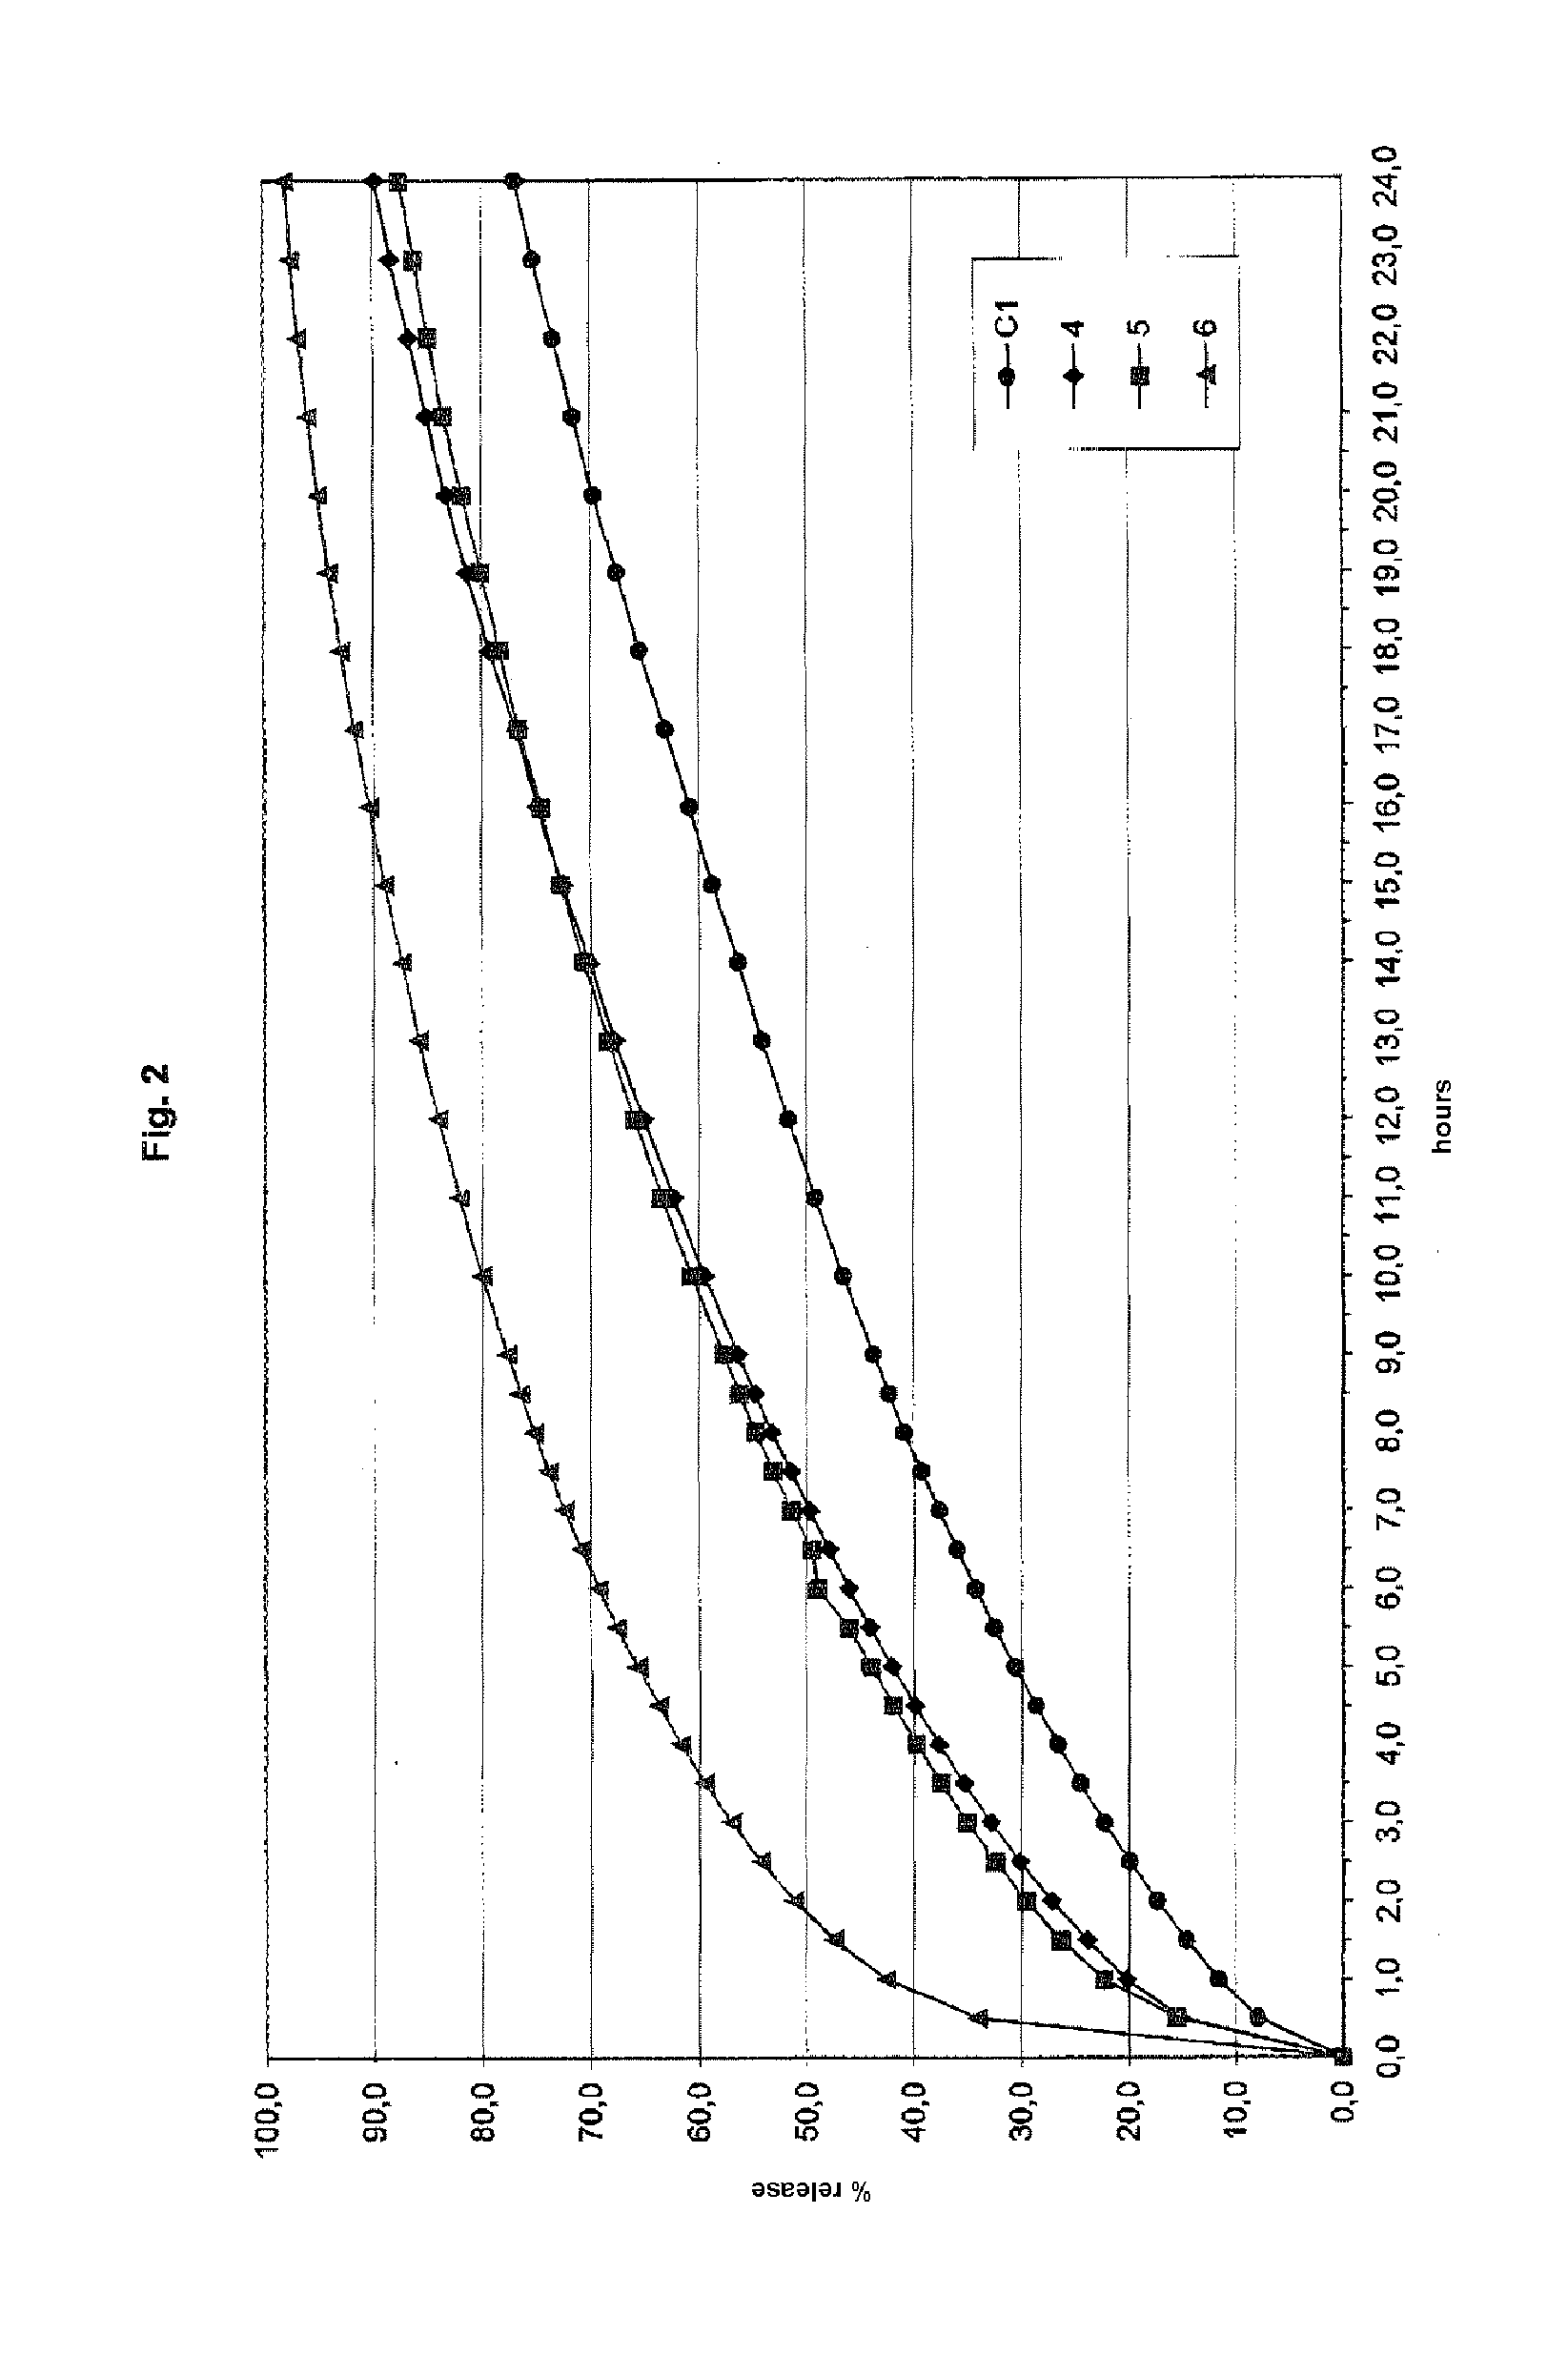 Controlled release pharmaceutical or food formulation and process for its preparation